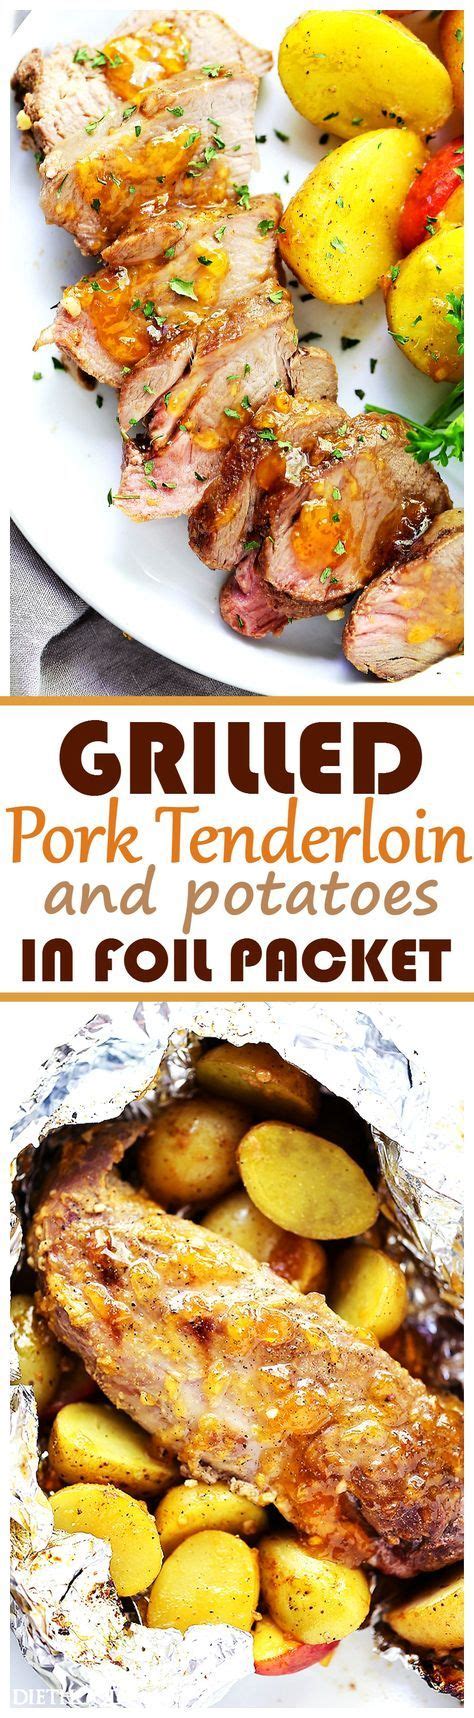 To roast pork loin in the oven, preheat the oven to 375 °f and combine the salt, pepper, and garlic. Grilled Peach-Glazed Pork Tenderloin Foil Packet with Potatoes - Glazed with peach preserves and ...